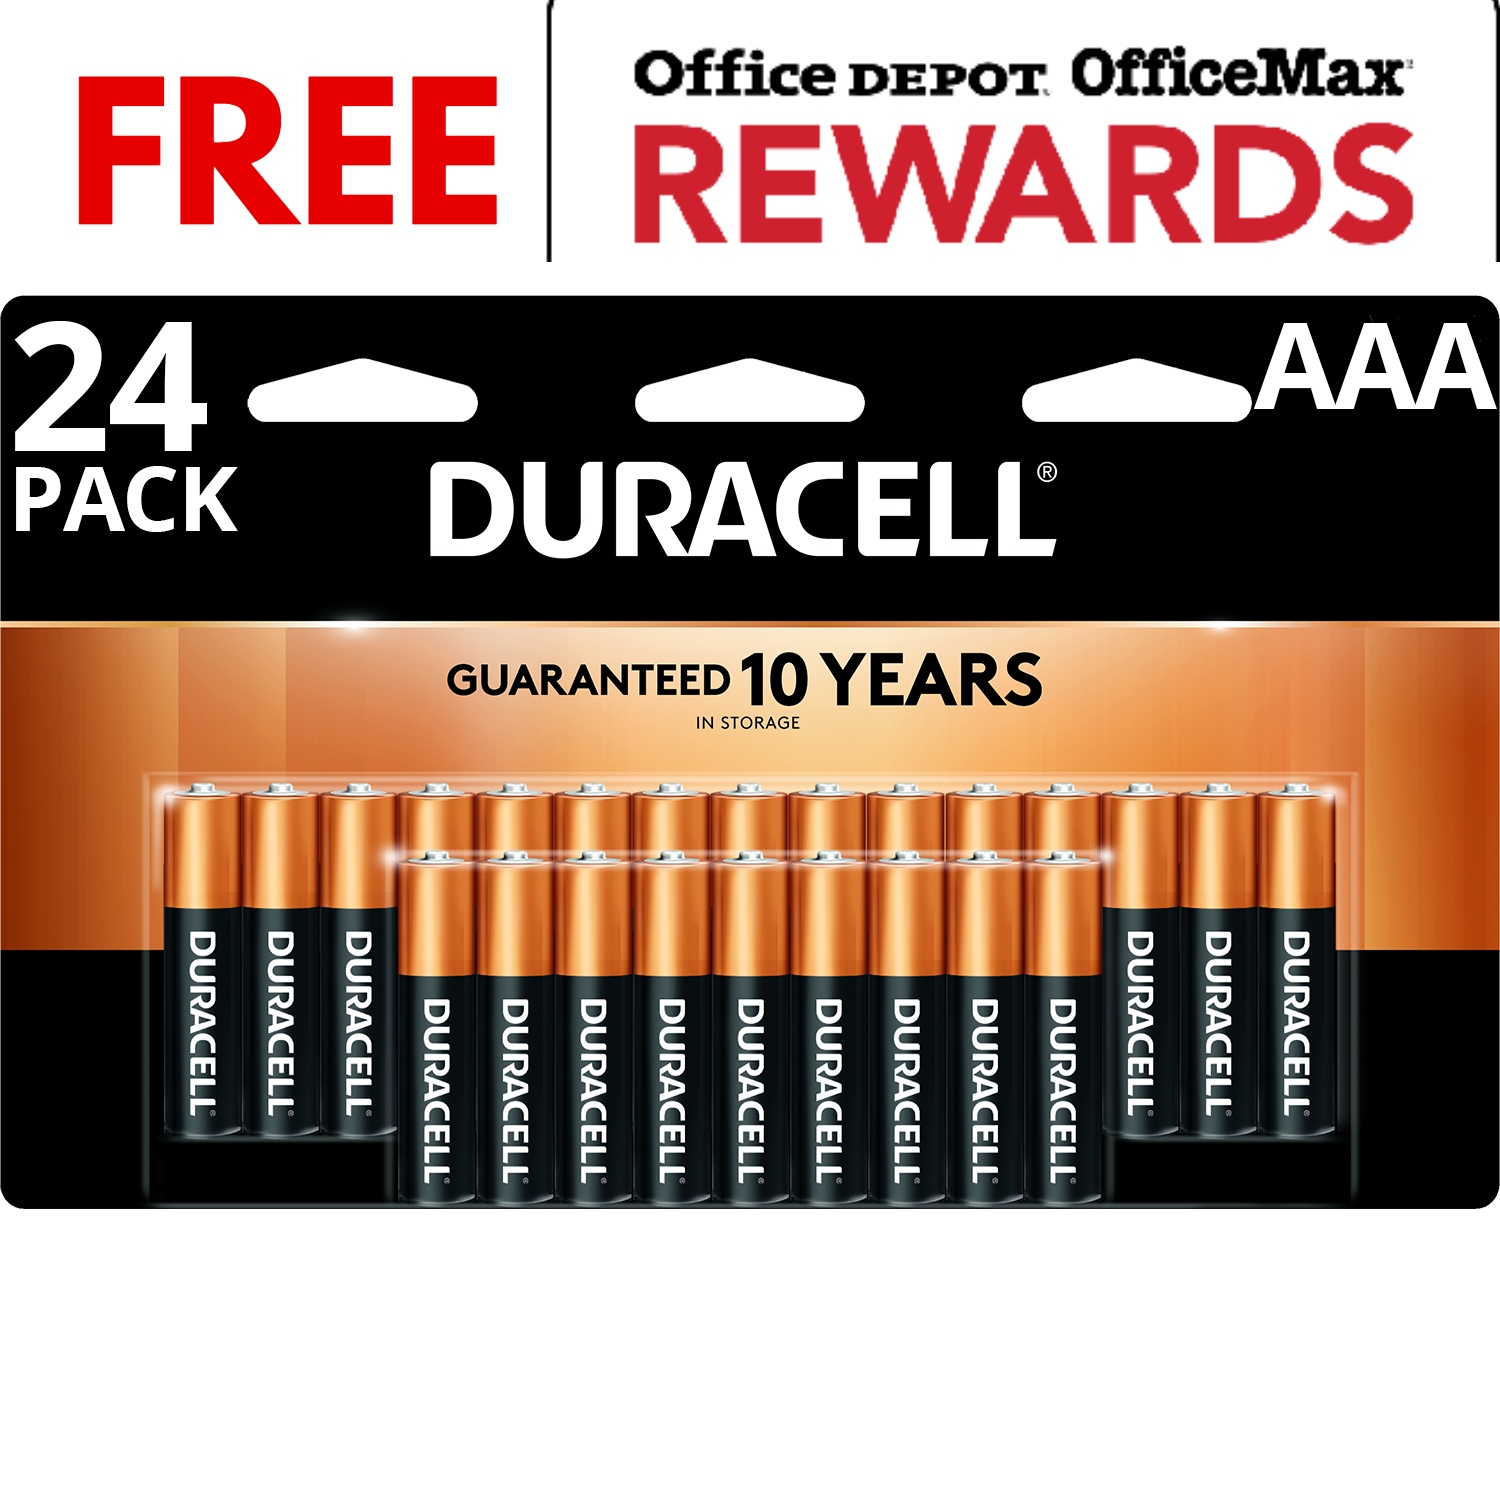 FREE Duracell Batteries at Office Depot/Office Max